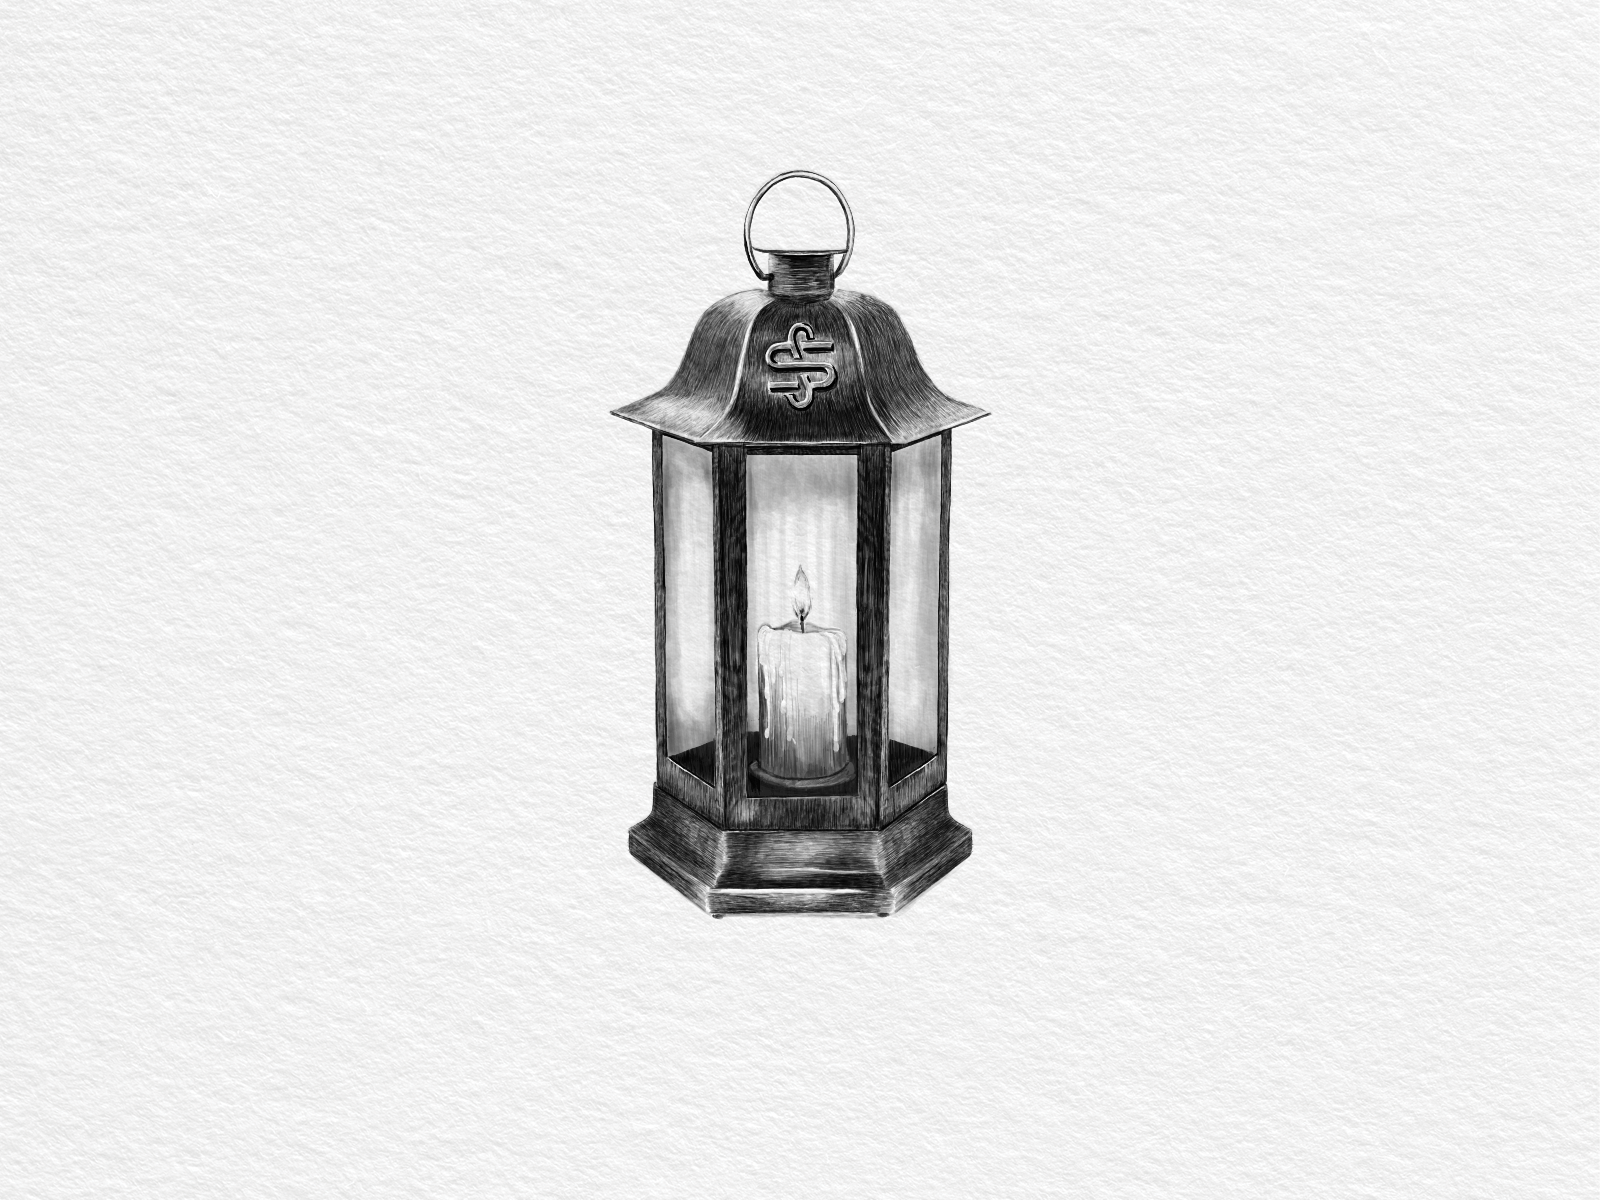 Lantern Drawing  How To Draw A Lantern Step By Step